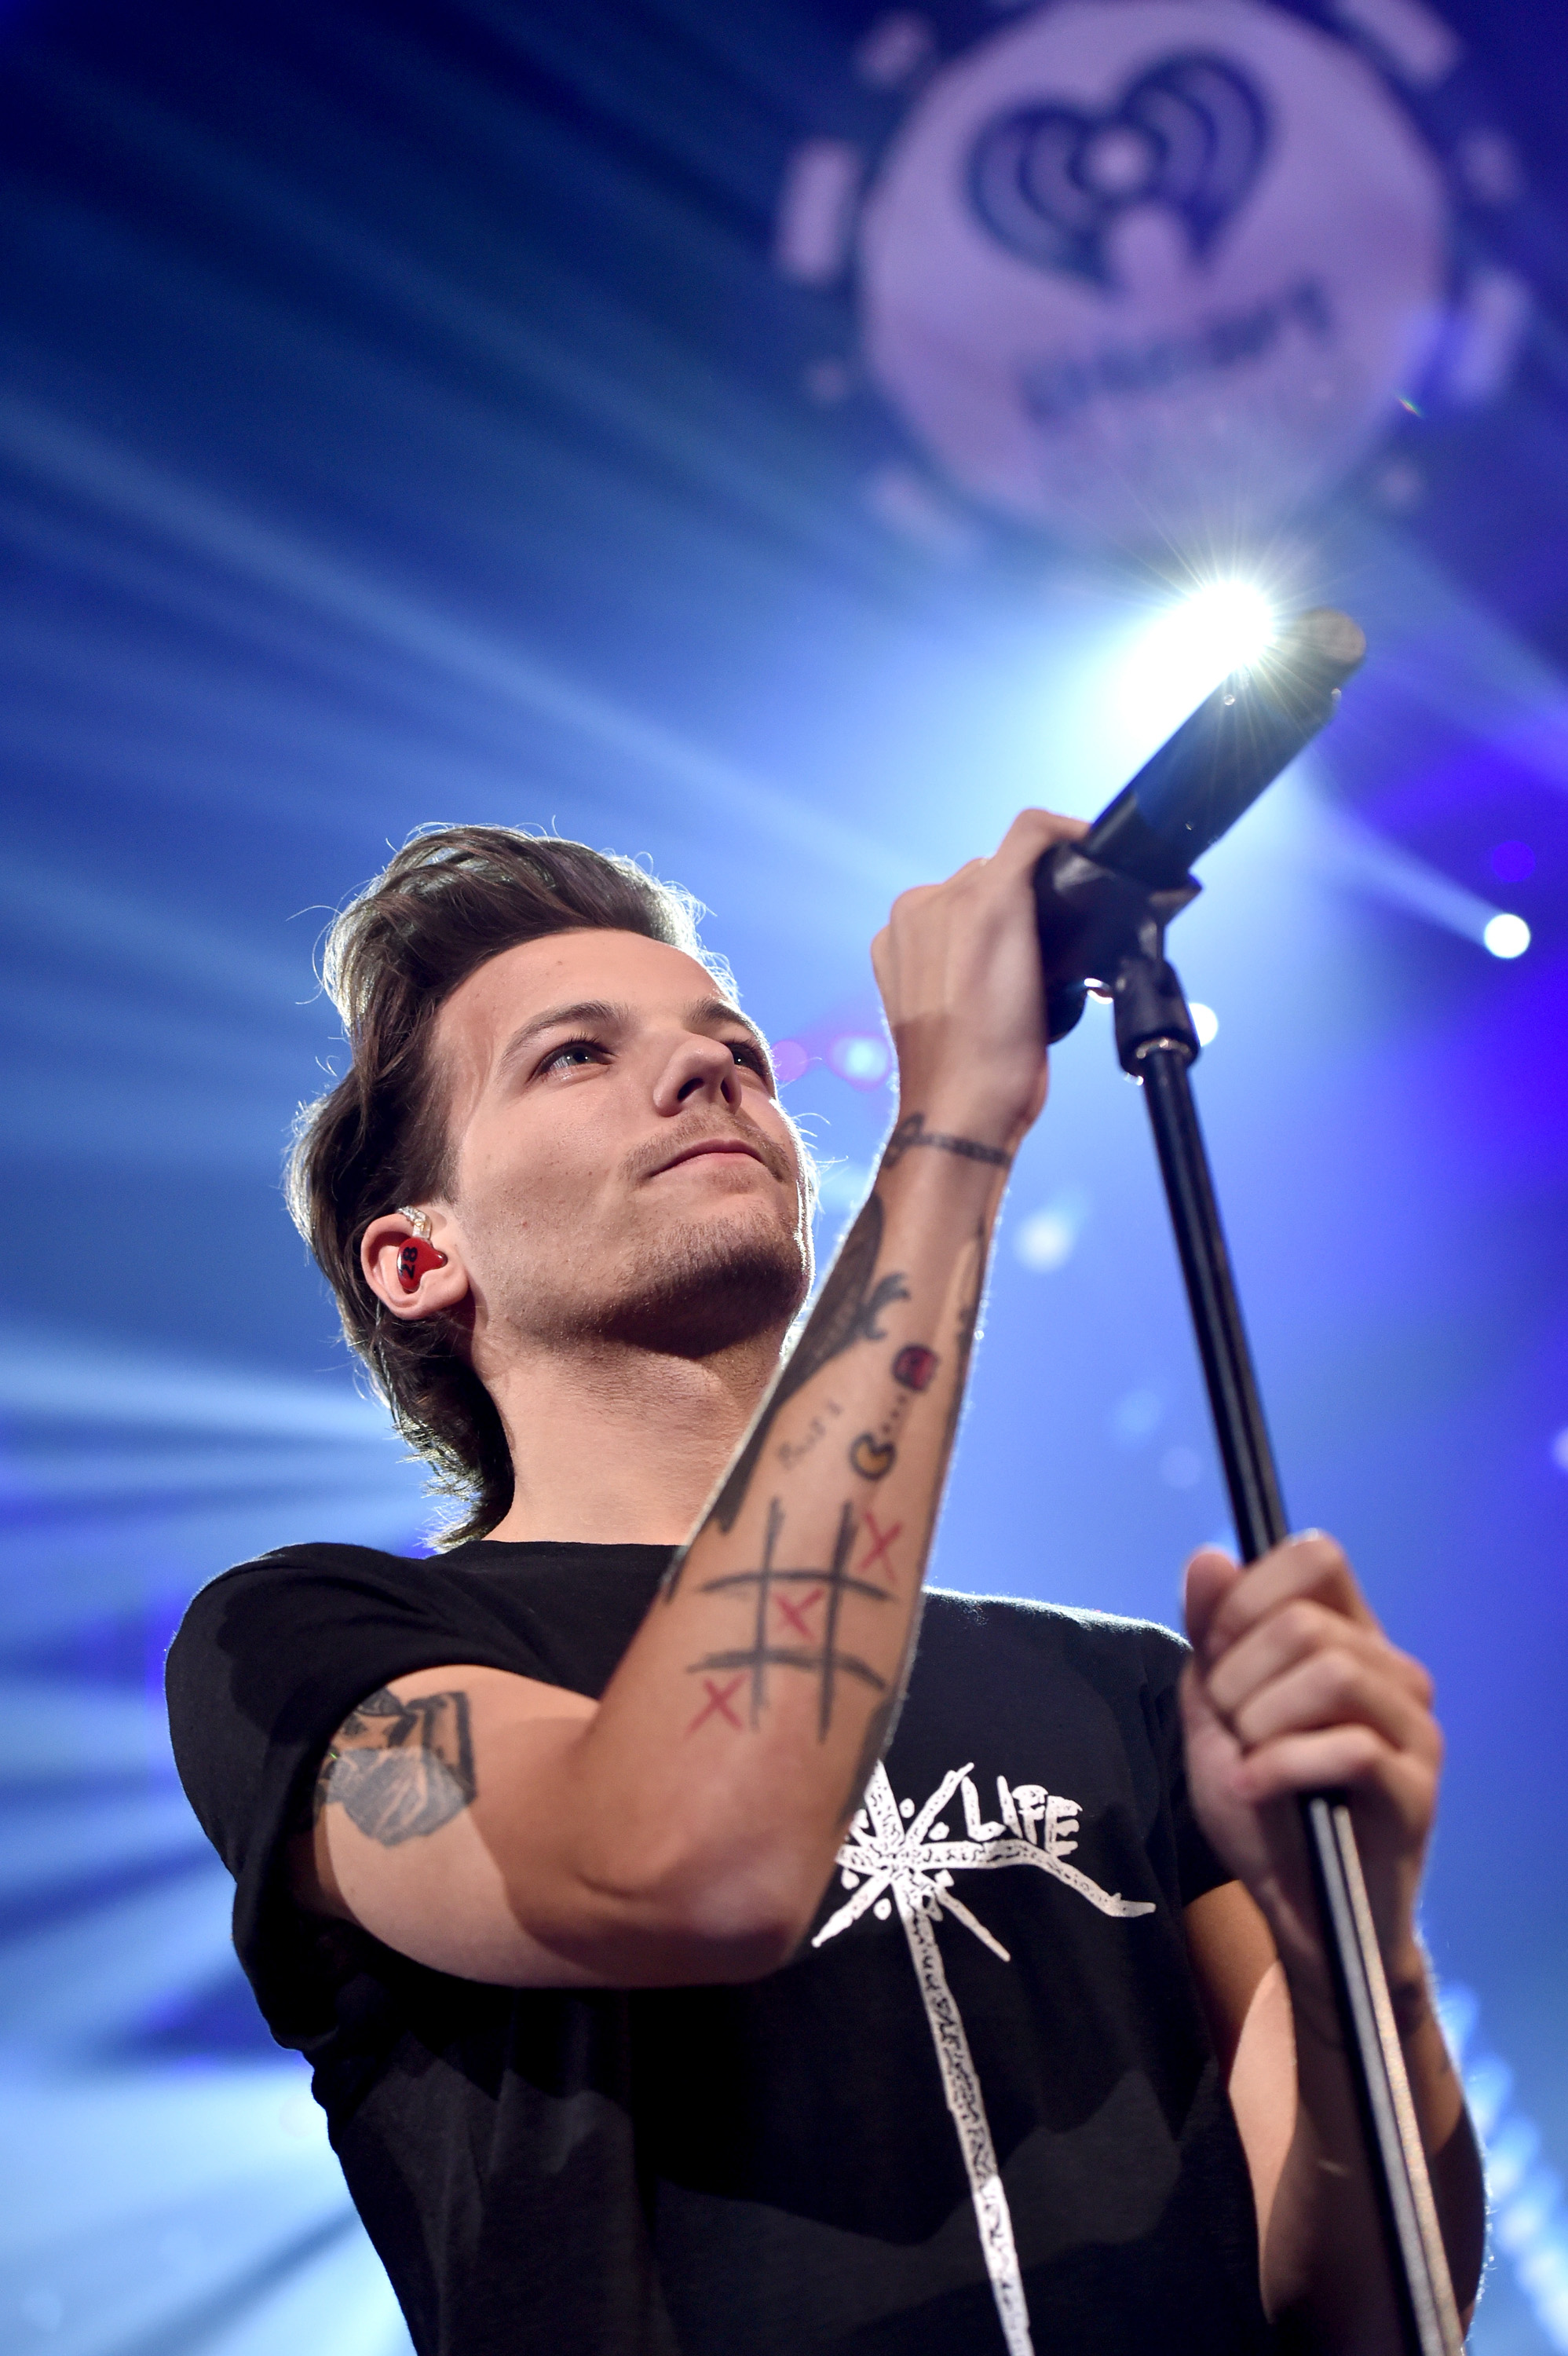 How Many Tattoos Does Louis Tomlinson Have? A Whole Lot, So Let's Break  Down 6 of the Biggies